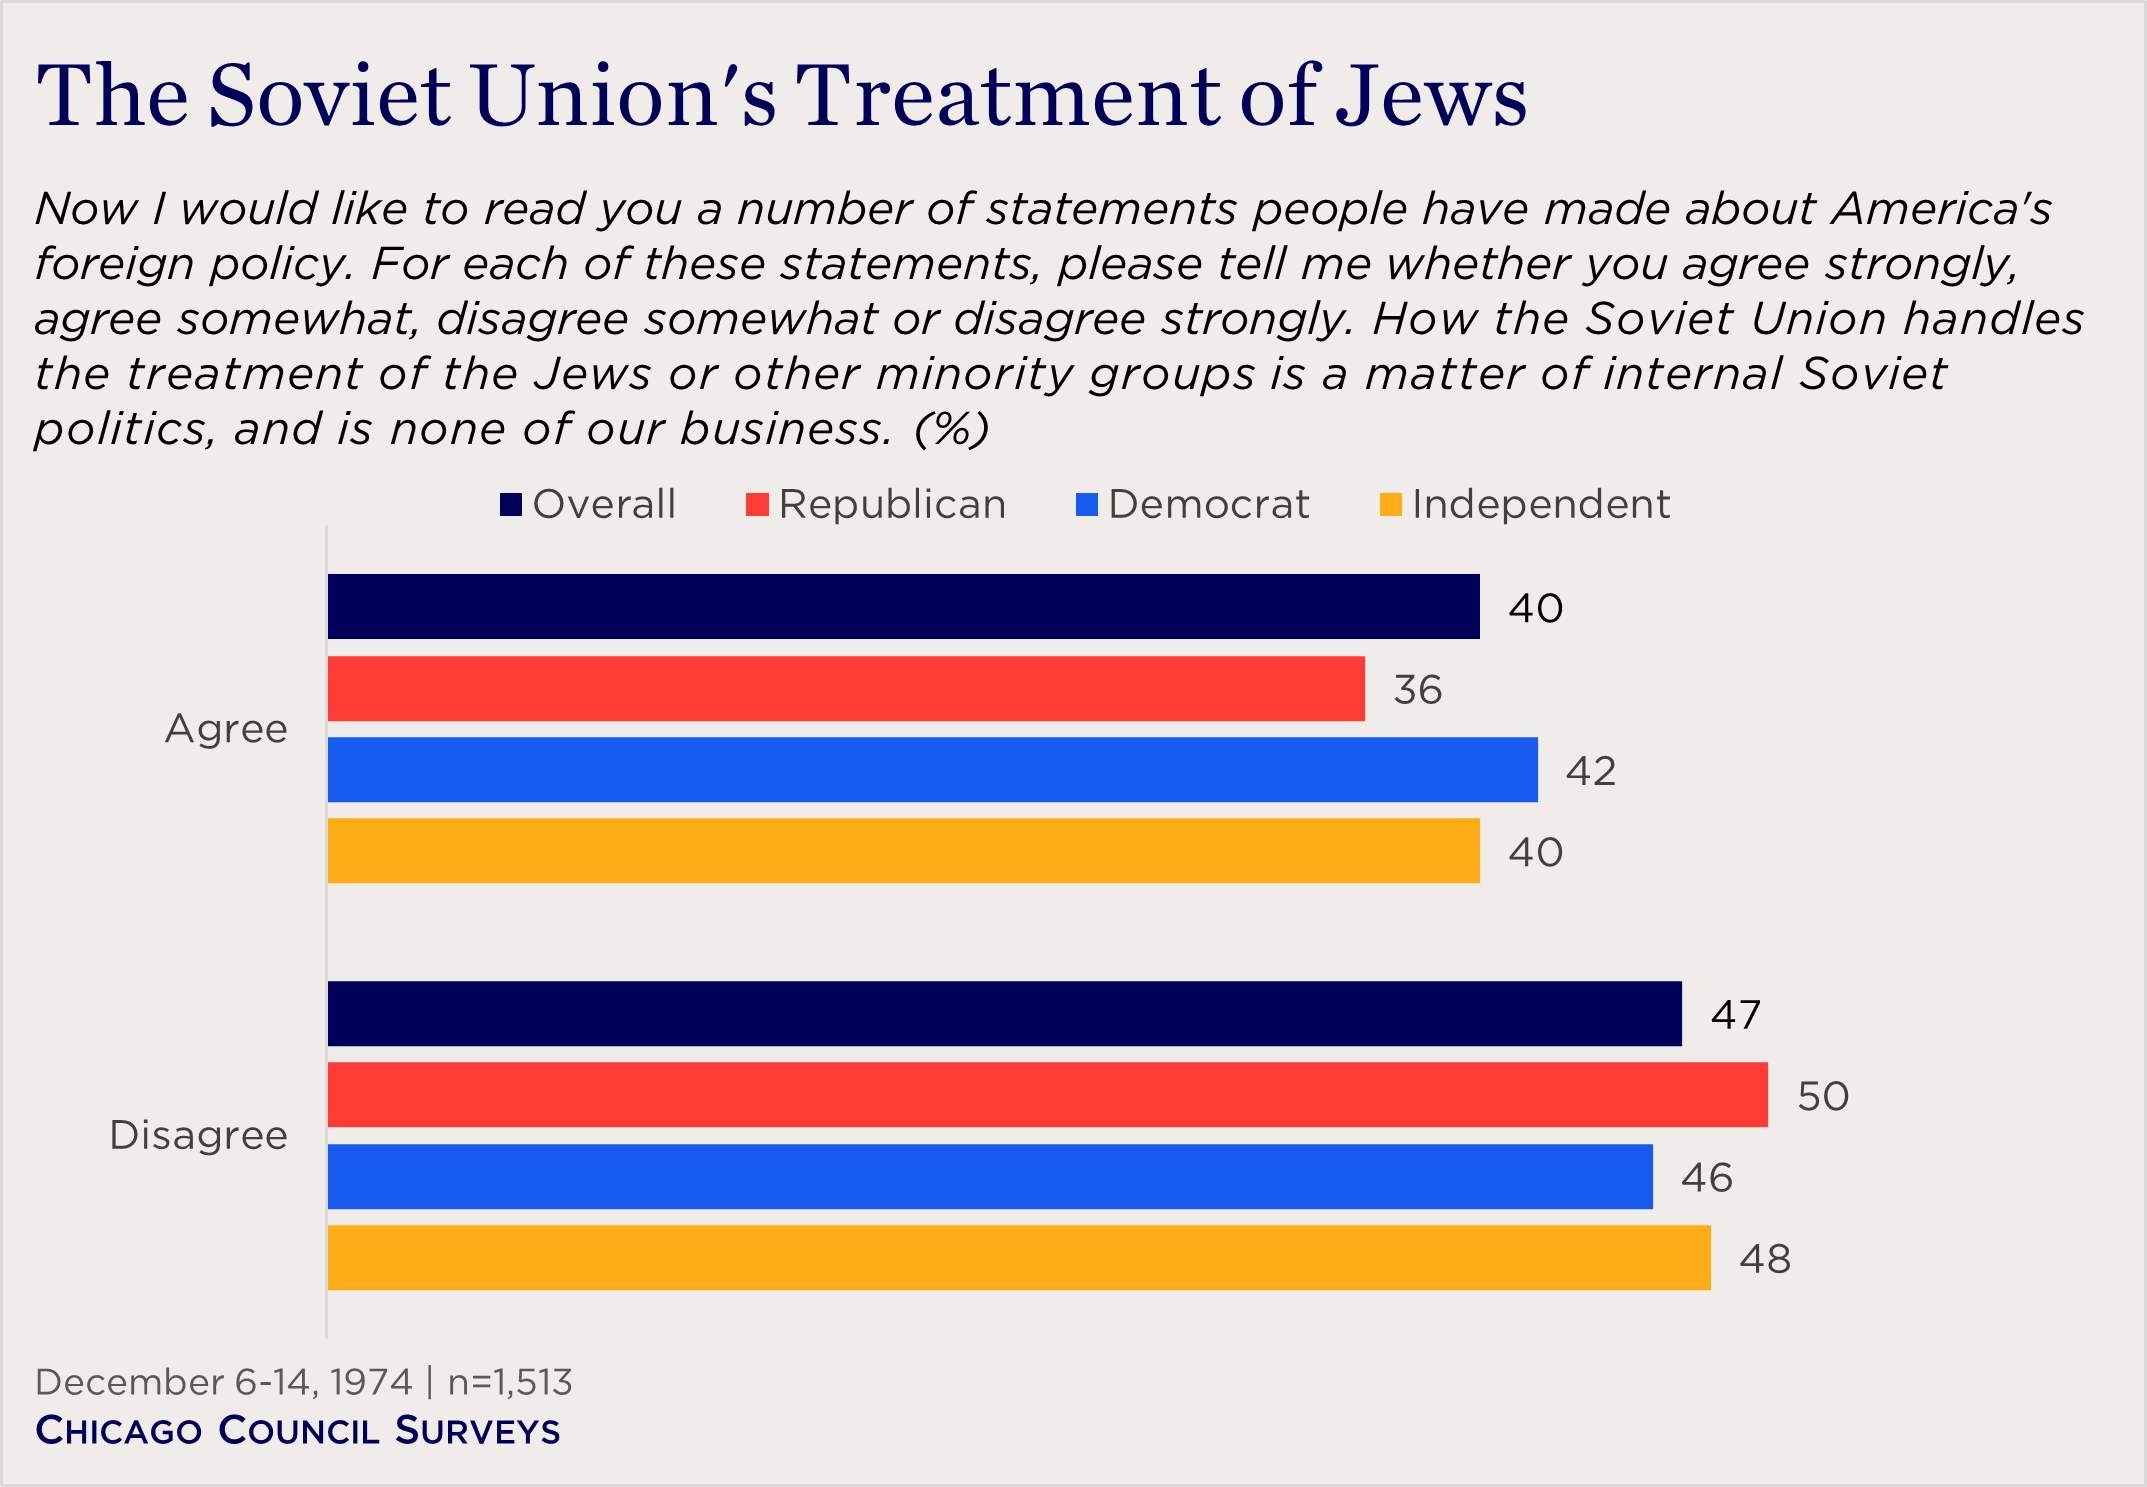 "partisan views on Soviet treatment of Jews and other minority groups"